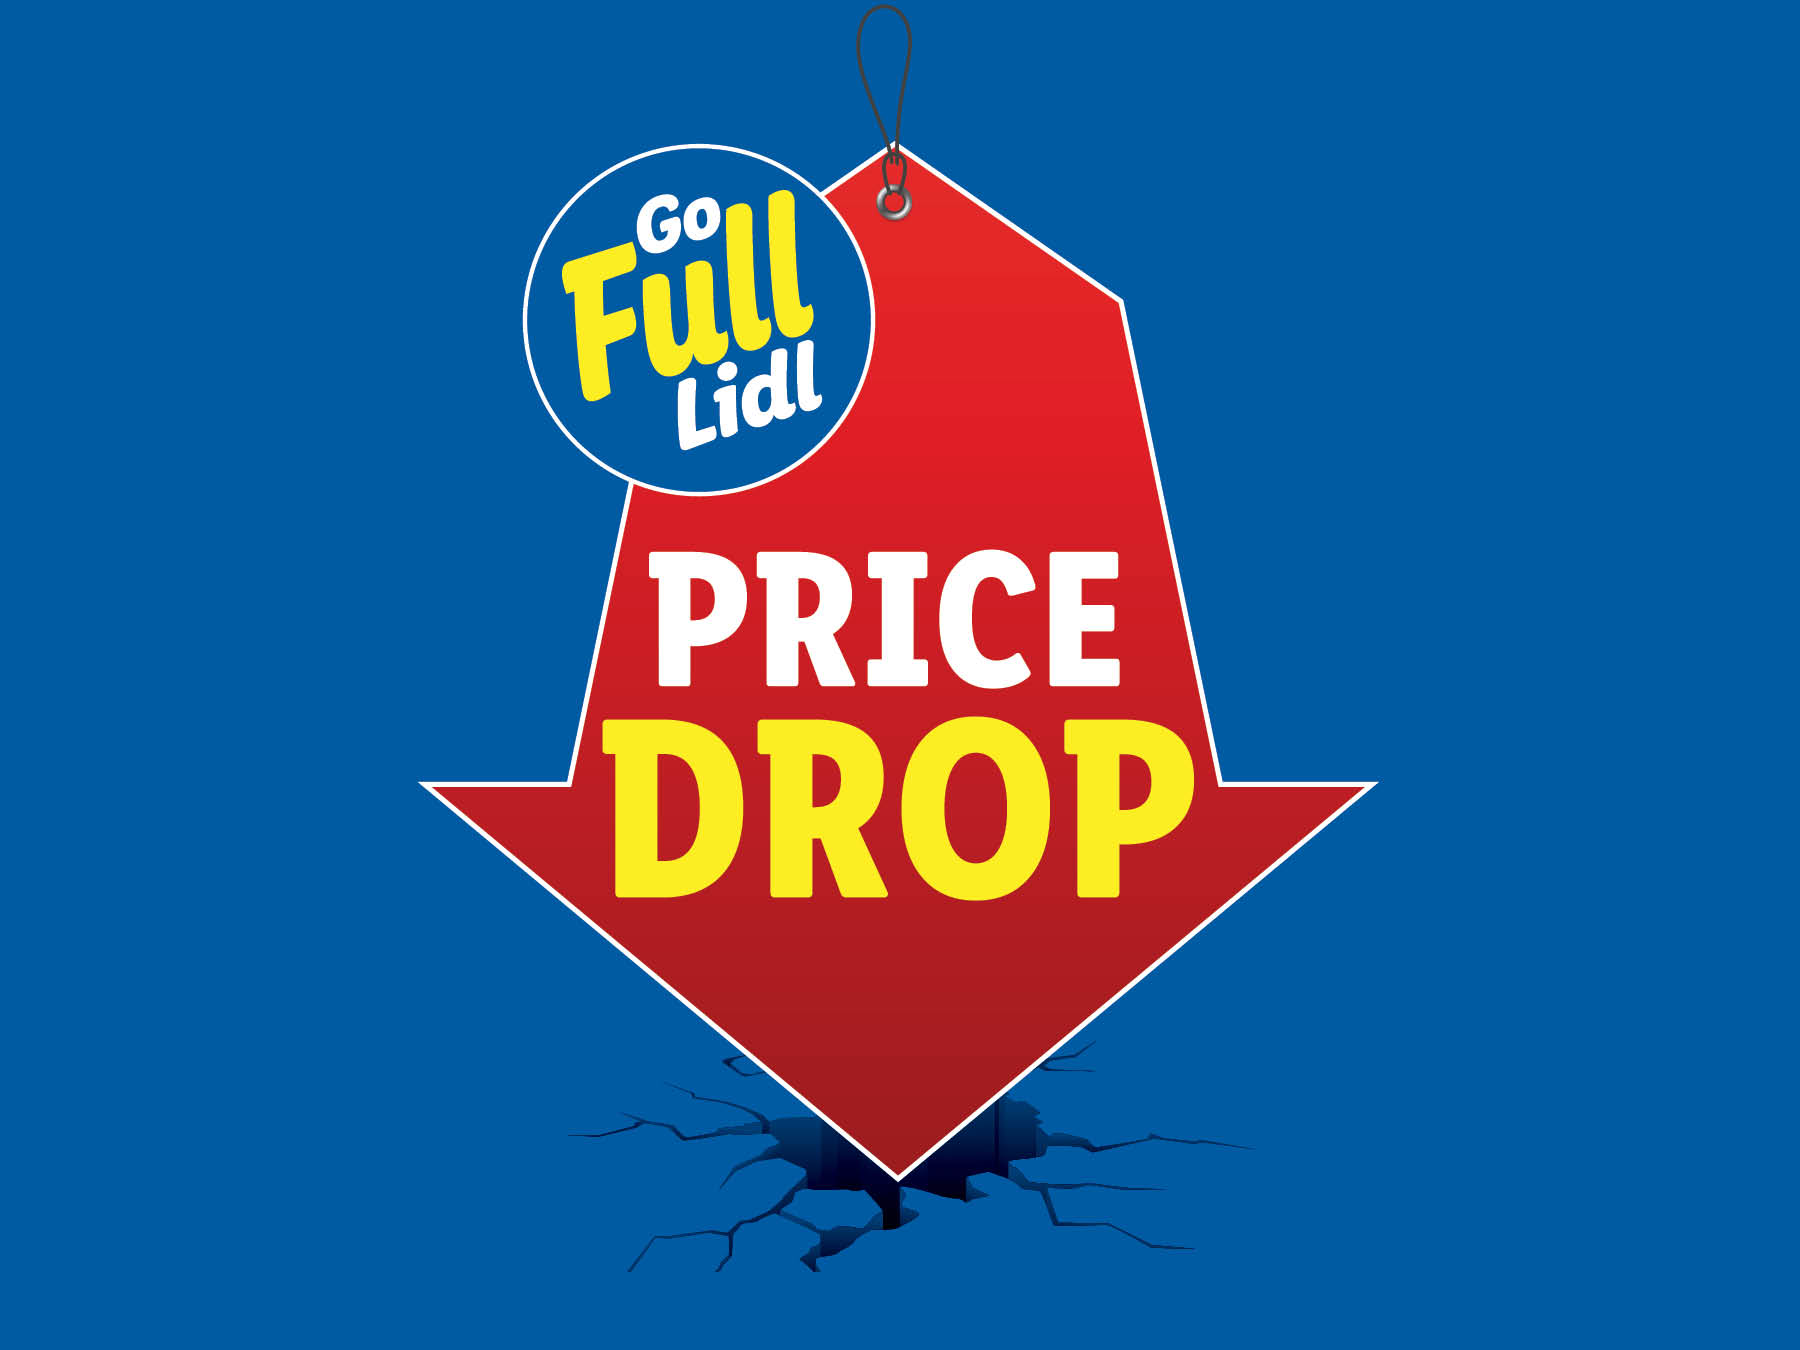 Price Drop - Over 600 Prices Dropped